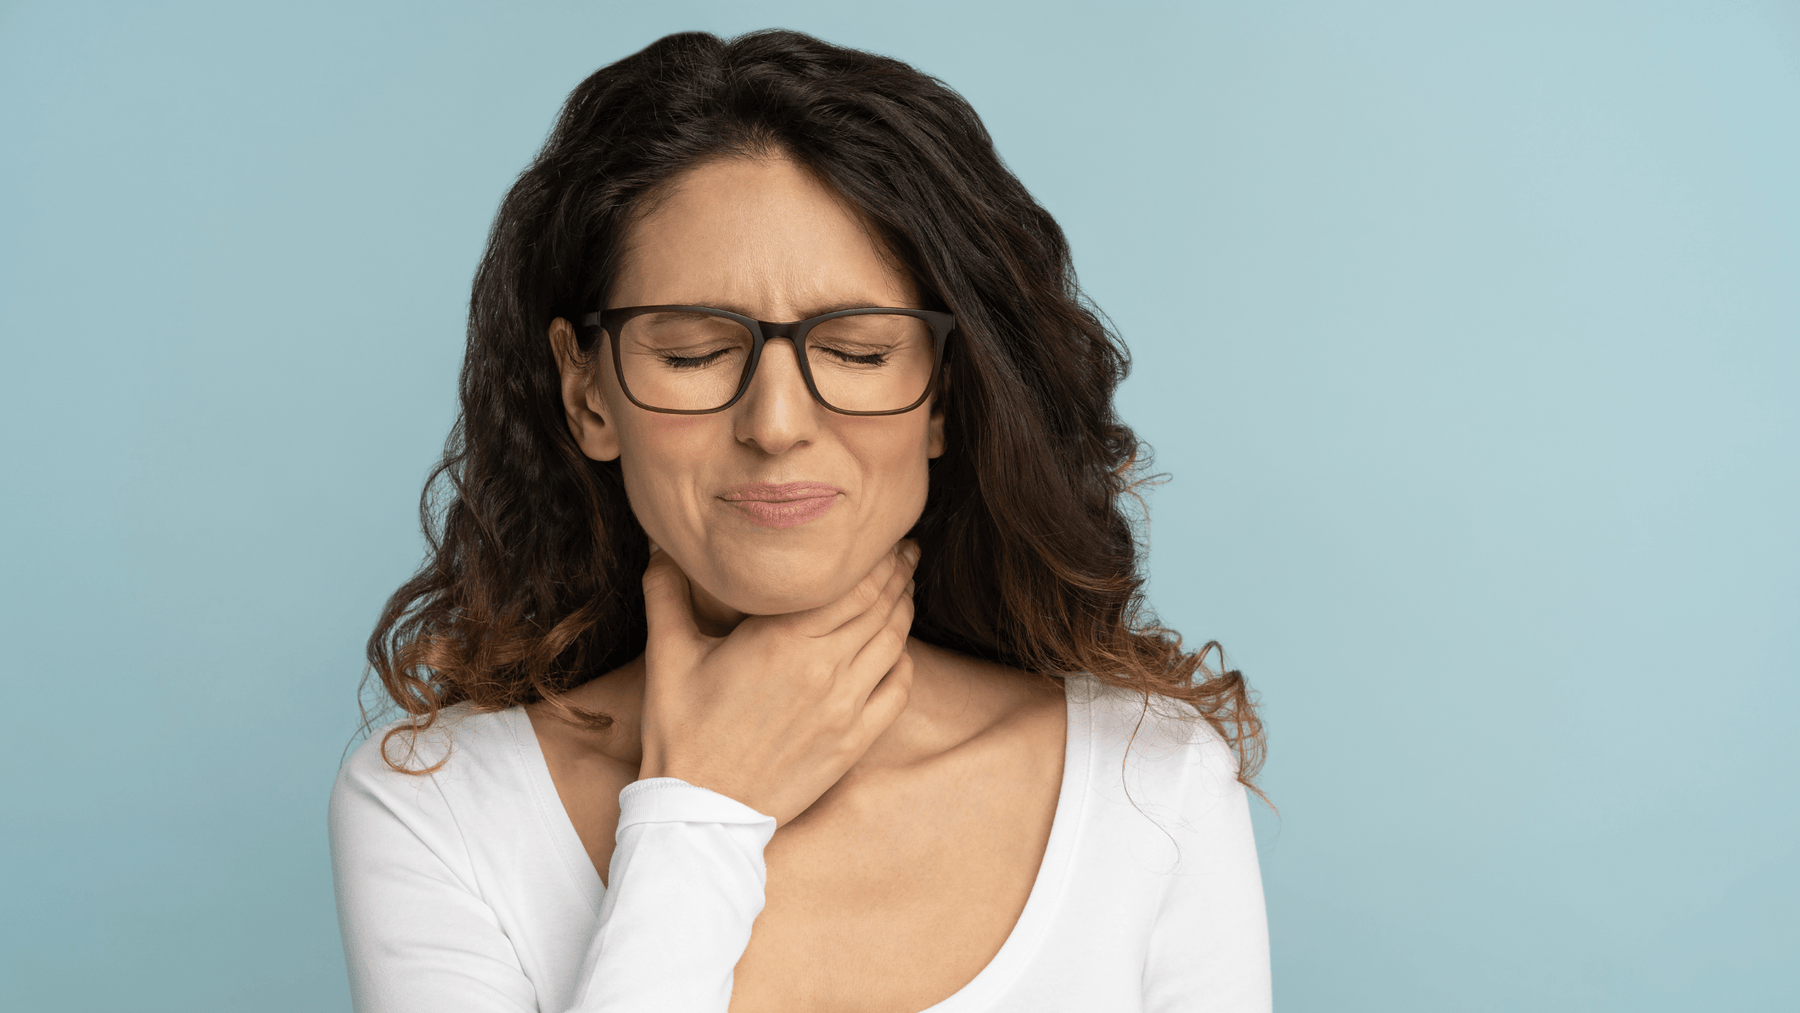 How to treat tonsil stones and bad breath